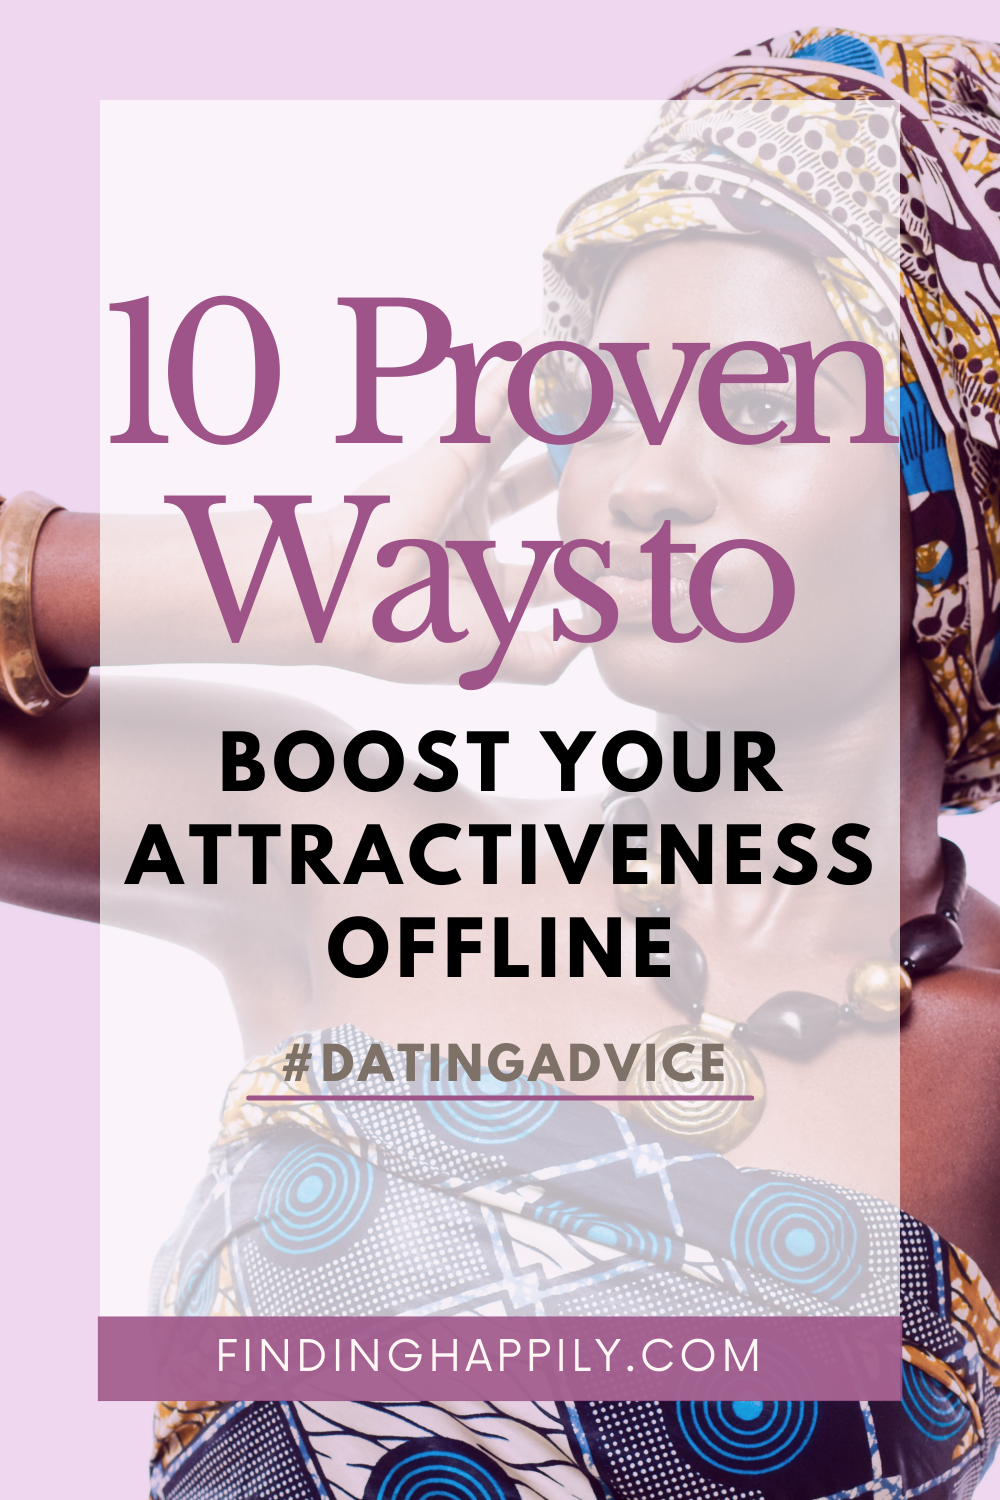 10 Proven Ways to Boost Your Attractiveness